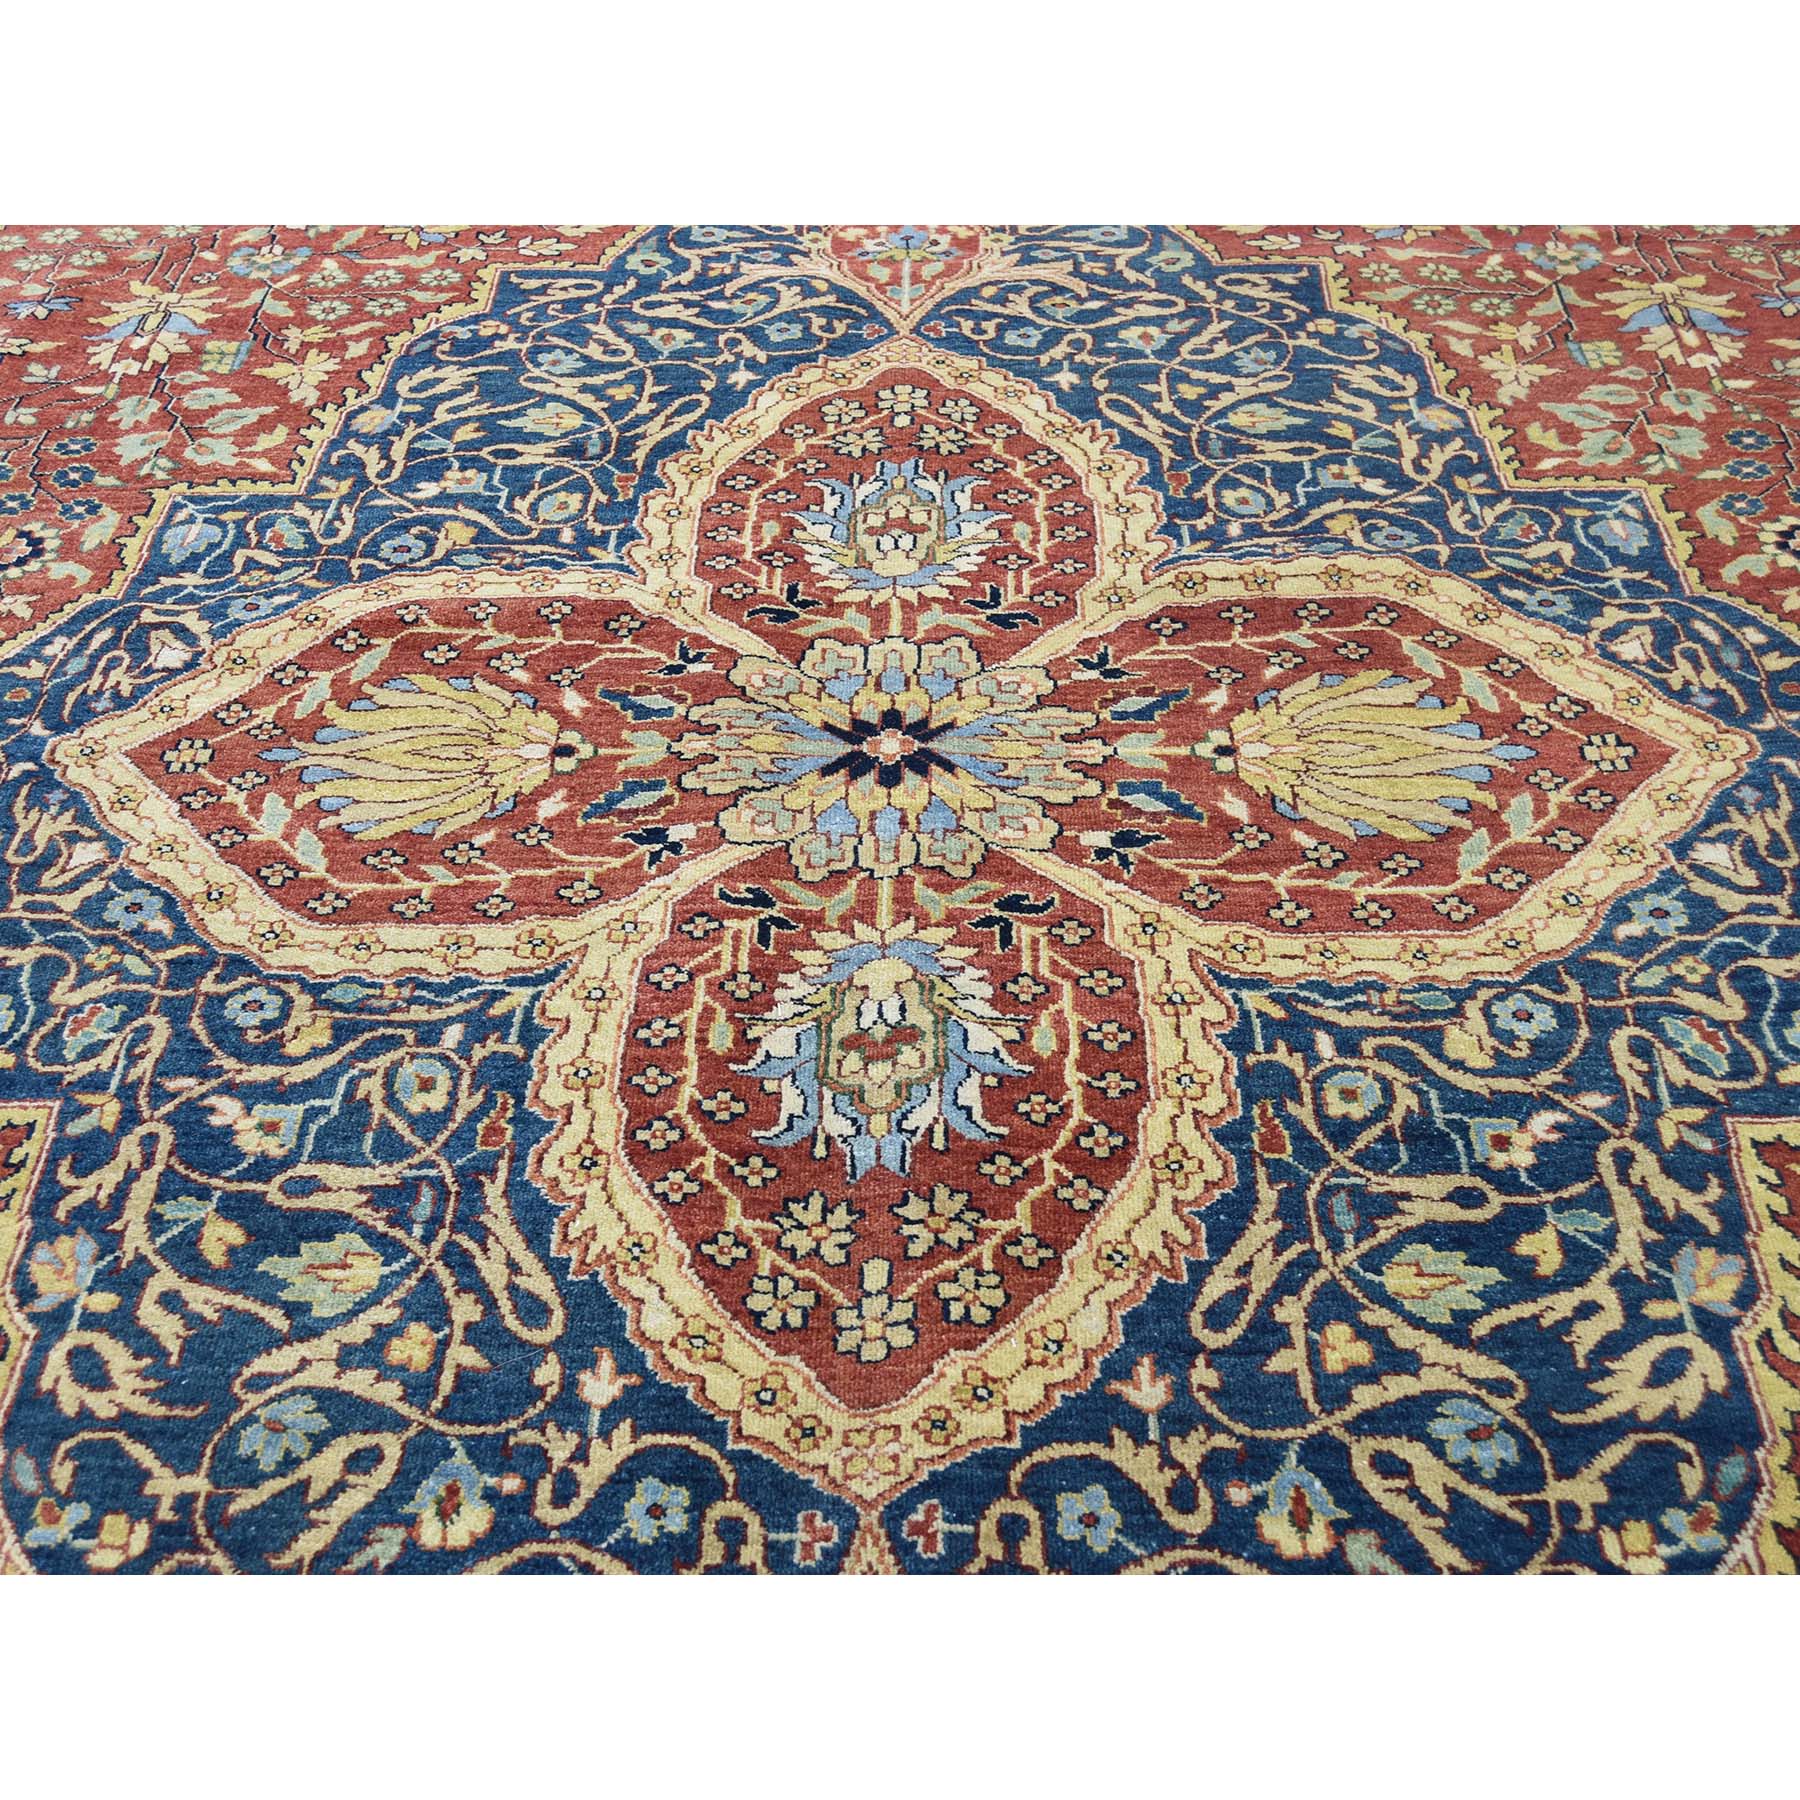 10-x14- Kashan Revival 100 Percent Wool Hand-Knotted Oriental Rug 